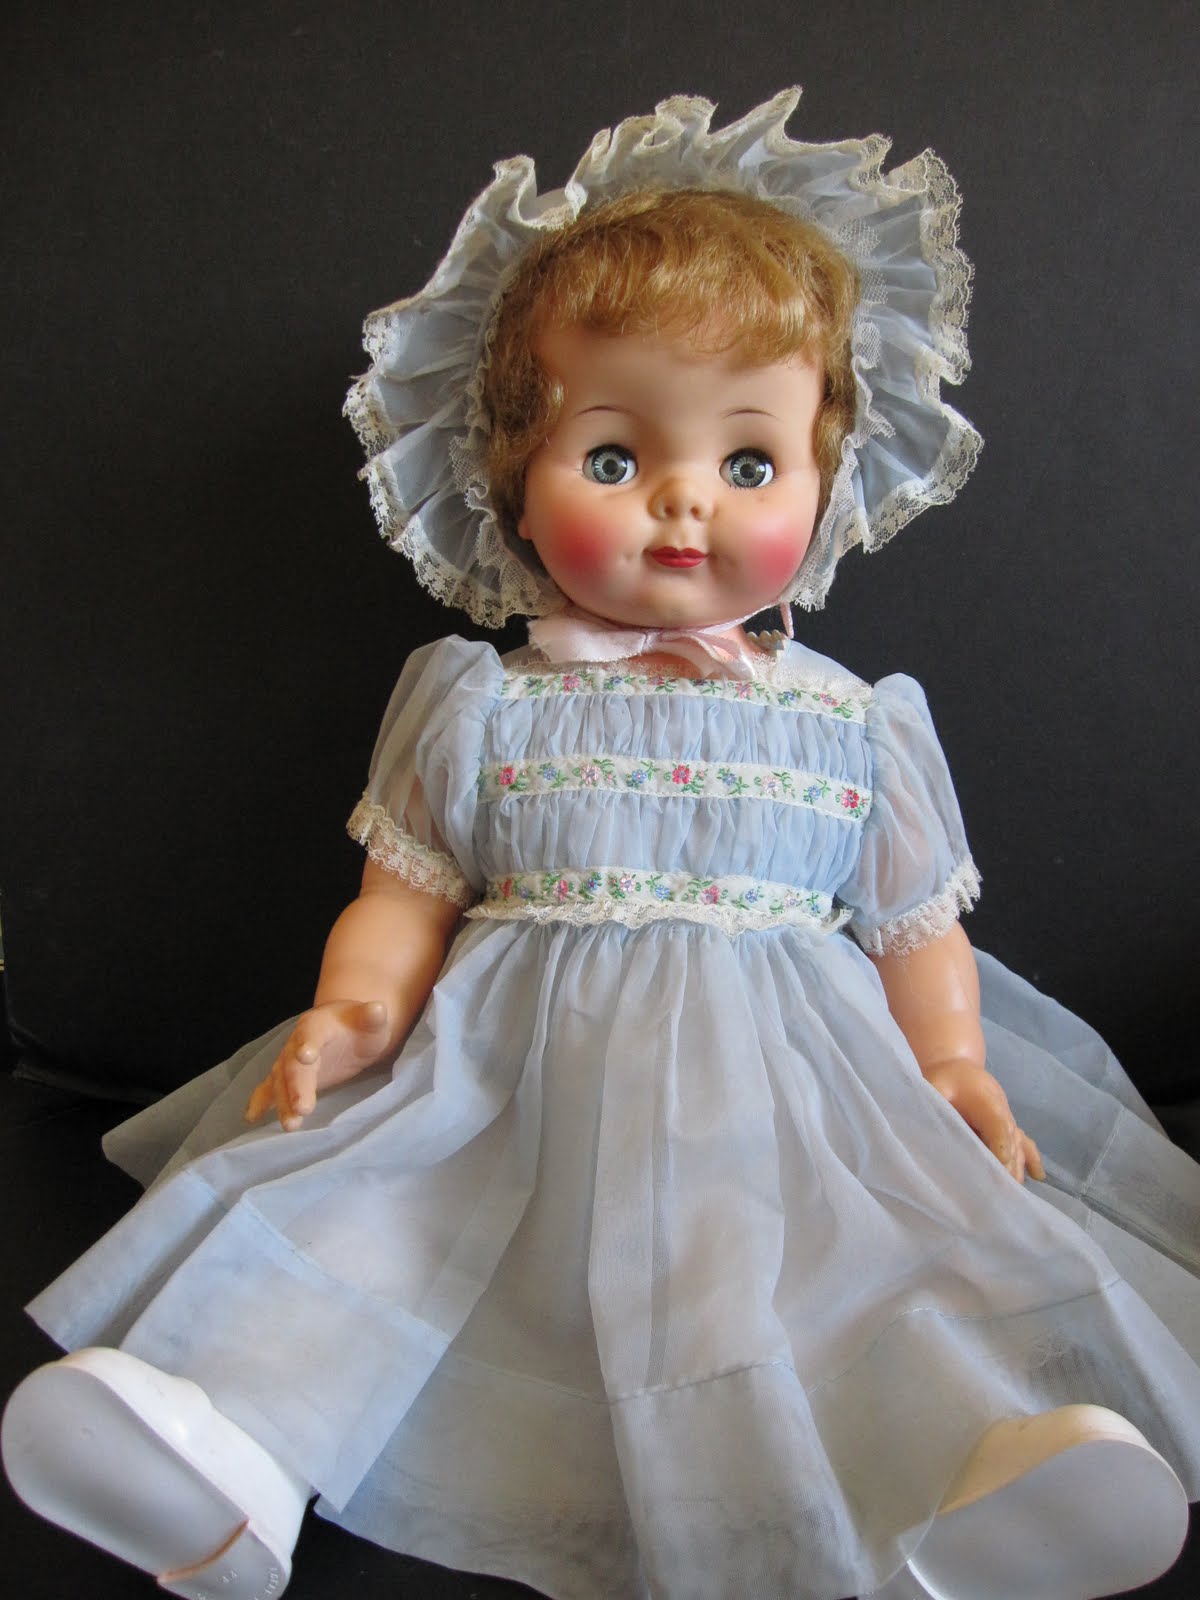 Dolls of the 1950s - Baby Boomer Dolls